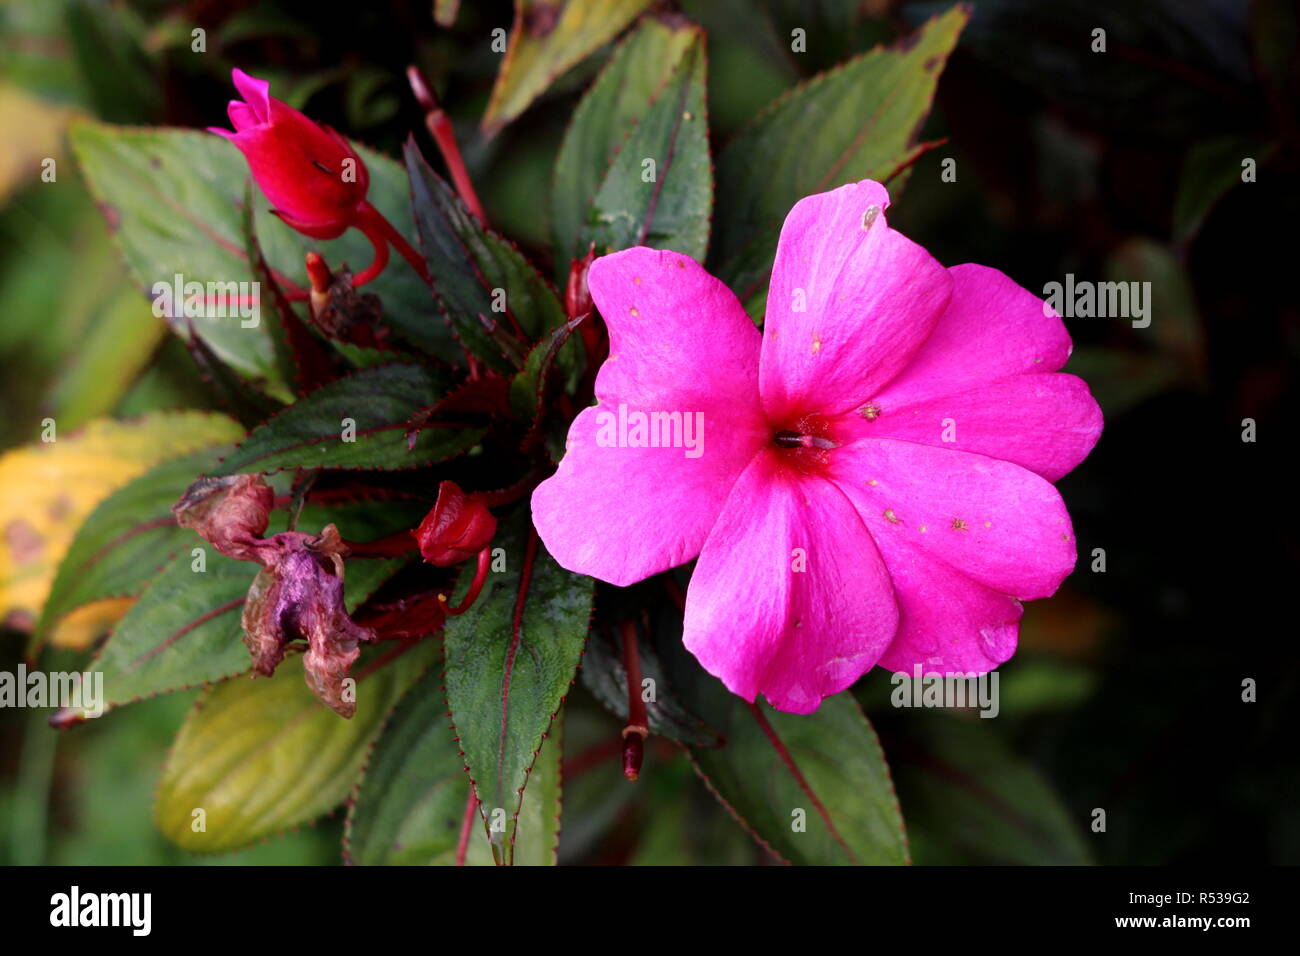 New Guinea impatiens or Impatiens hawkeri flowering plant with single open blooming large dark pink flower surrounded with closed flower buds Stock Photo